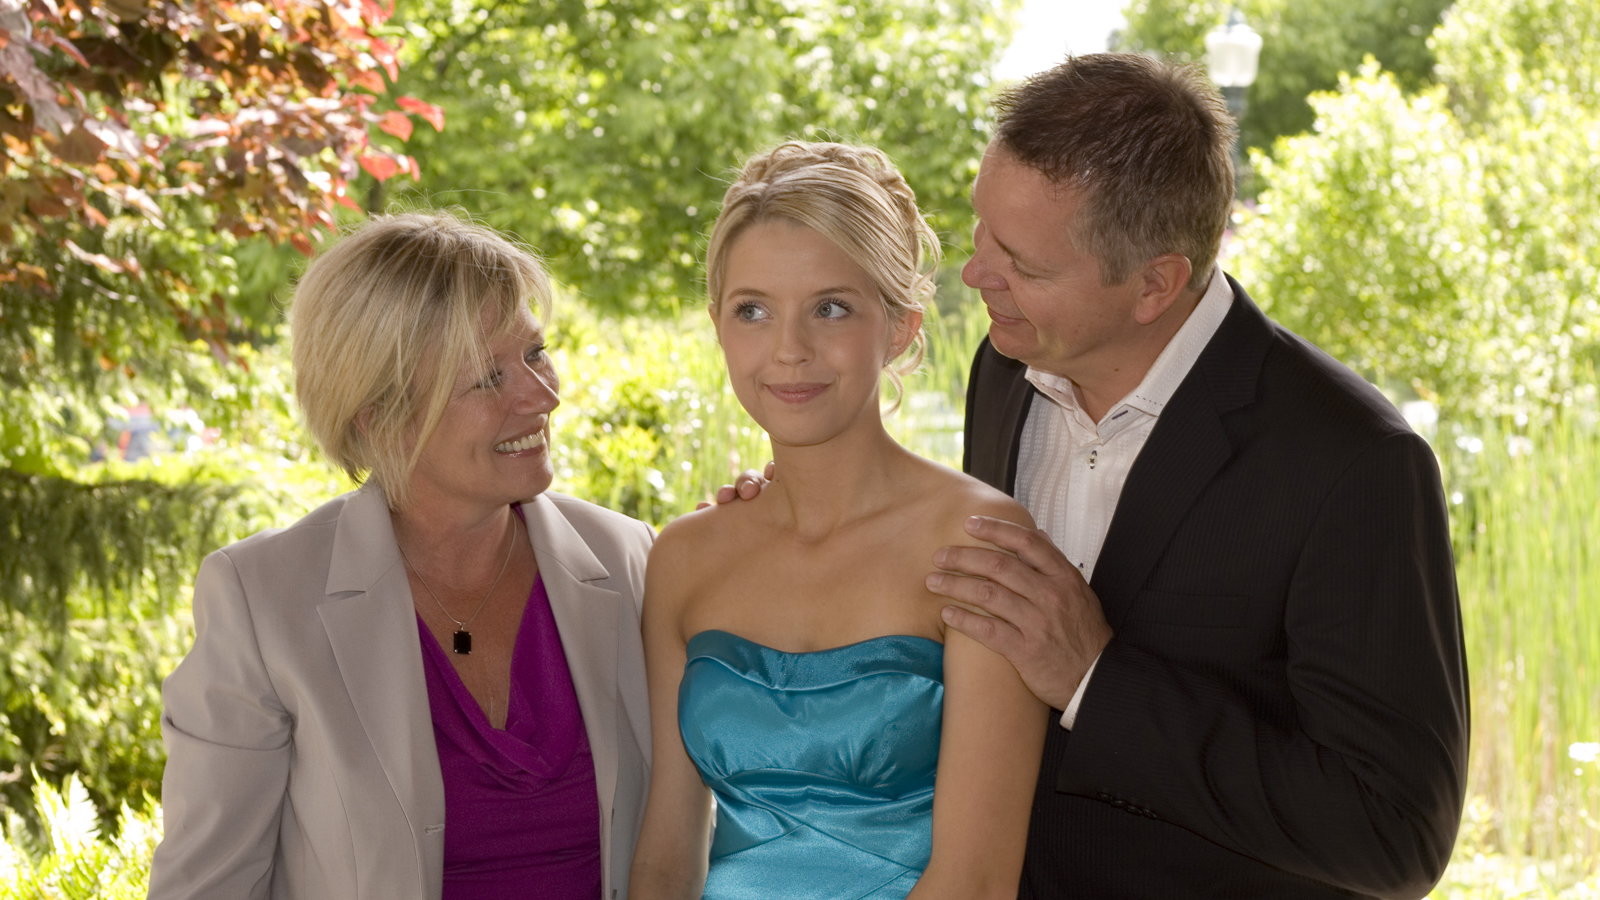 parents talking to teen daughter before date